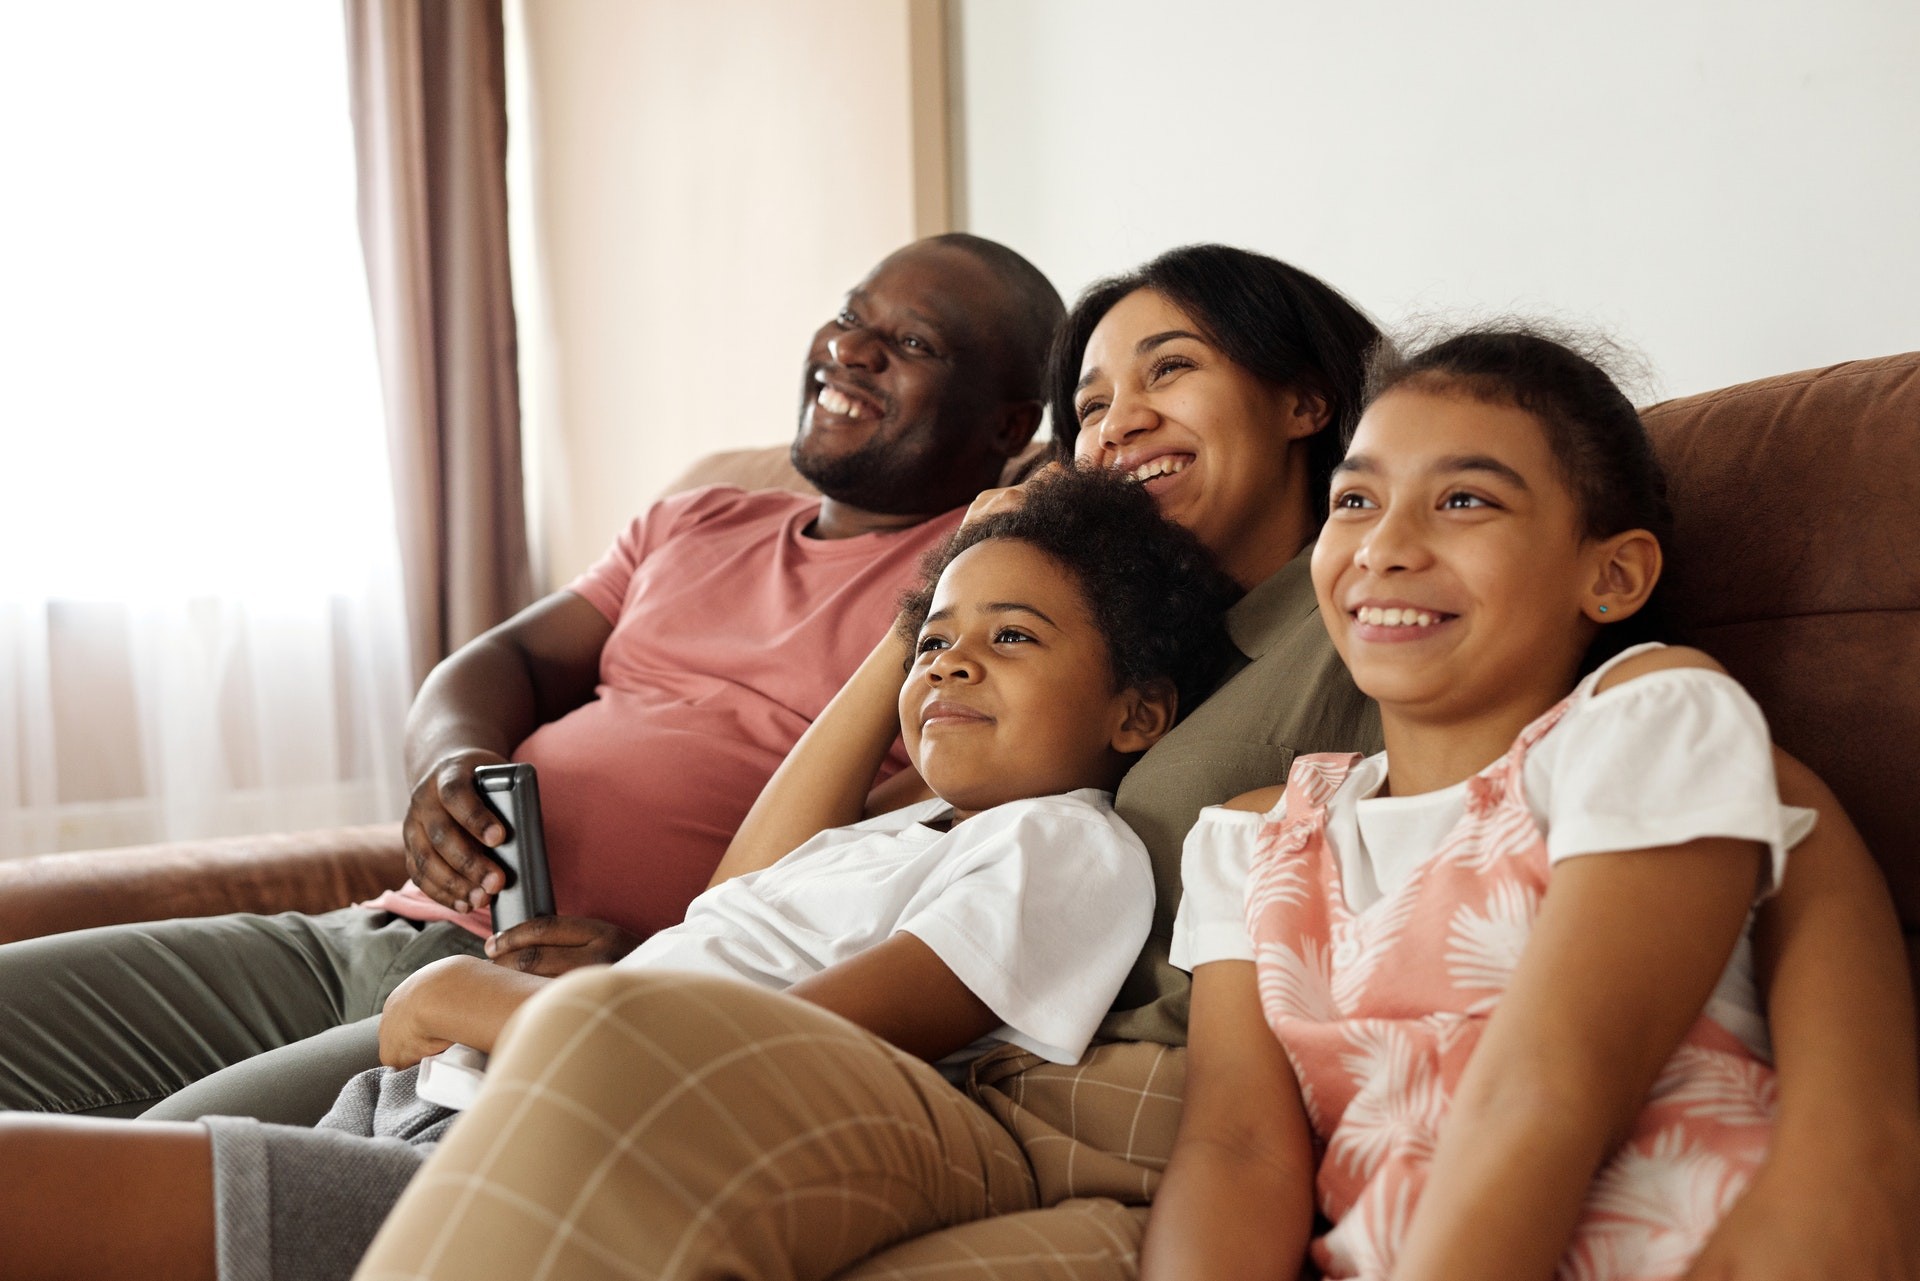 A family of four sits on a couch and smiles at a TV offscreen while they do earth day activities.